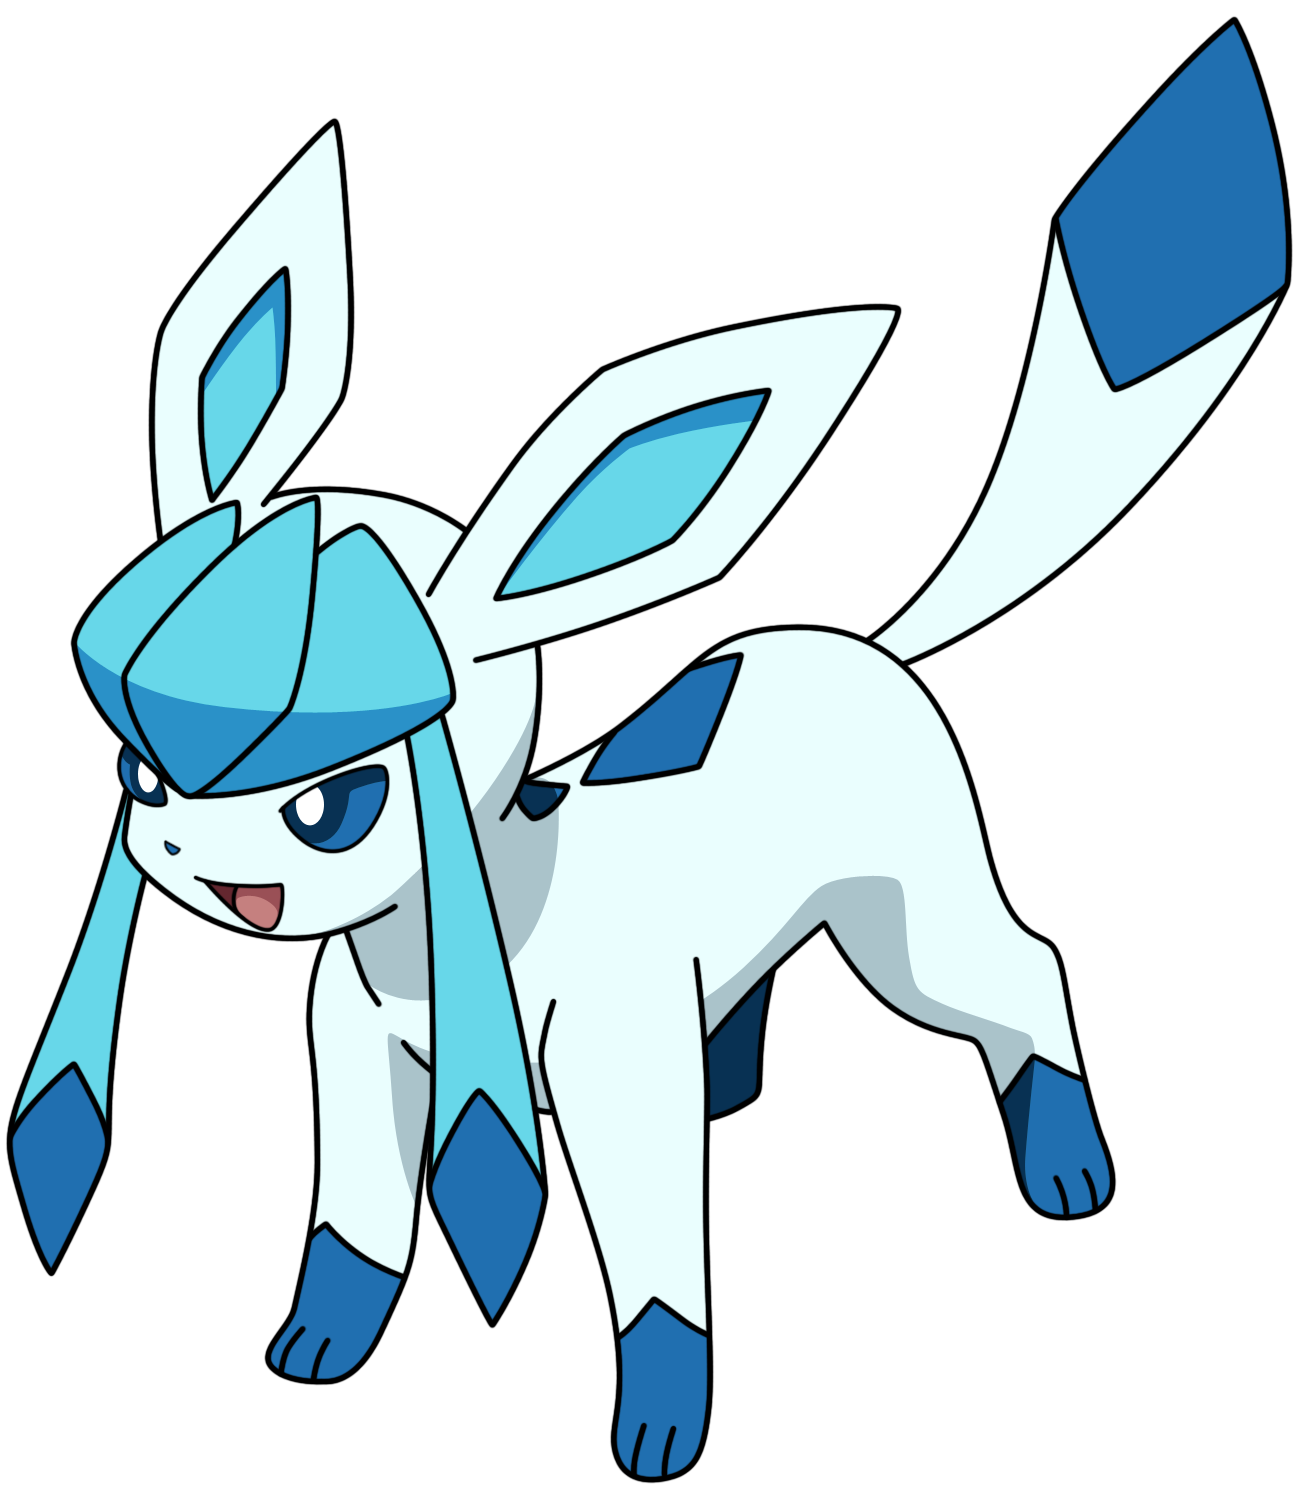 [Image: glaceon___shiny_version_by_kizarin-d5e3wht.png]